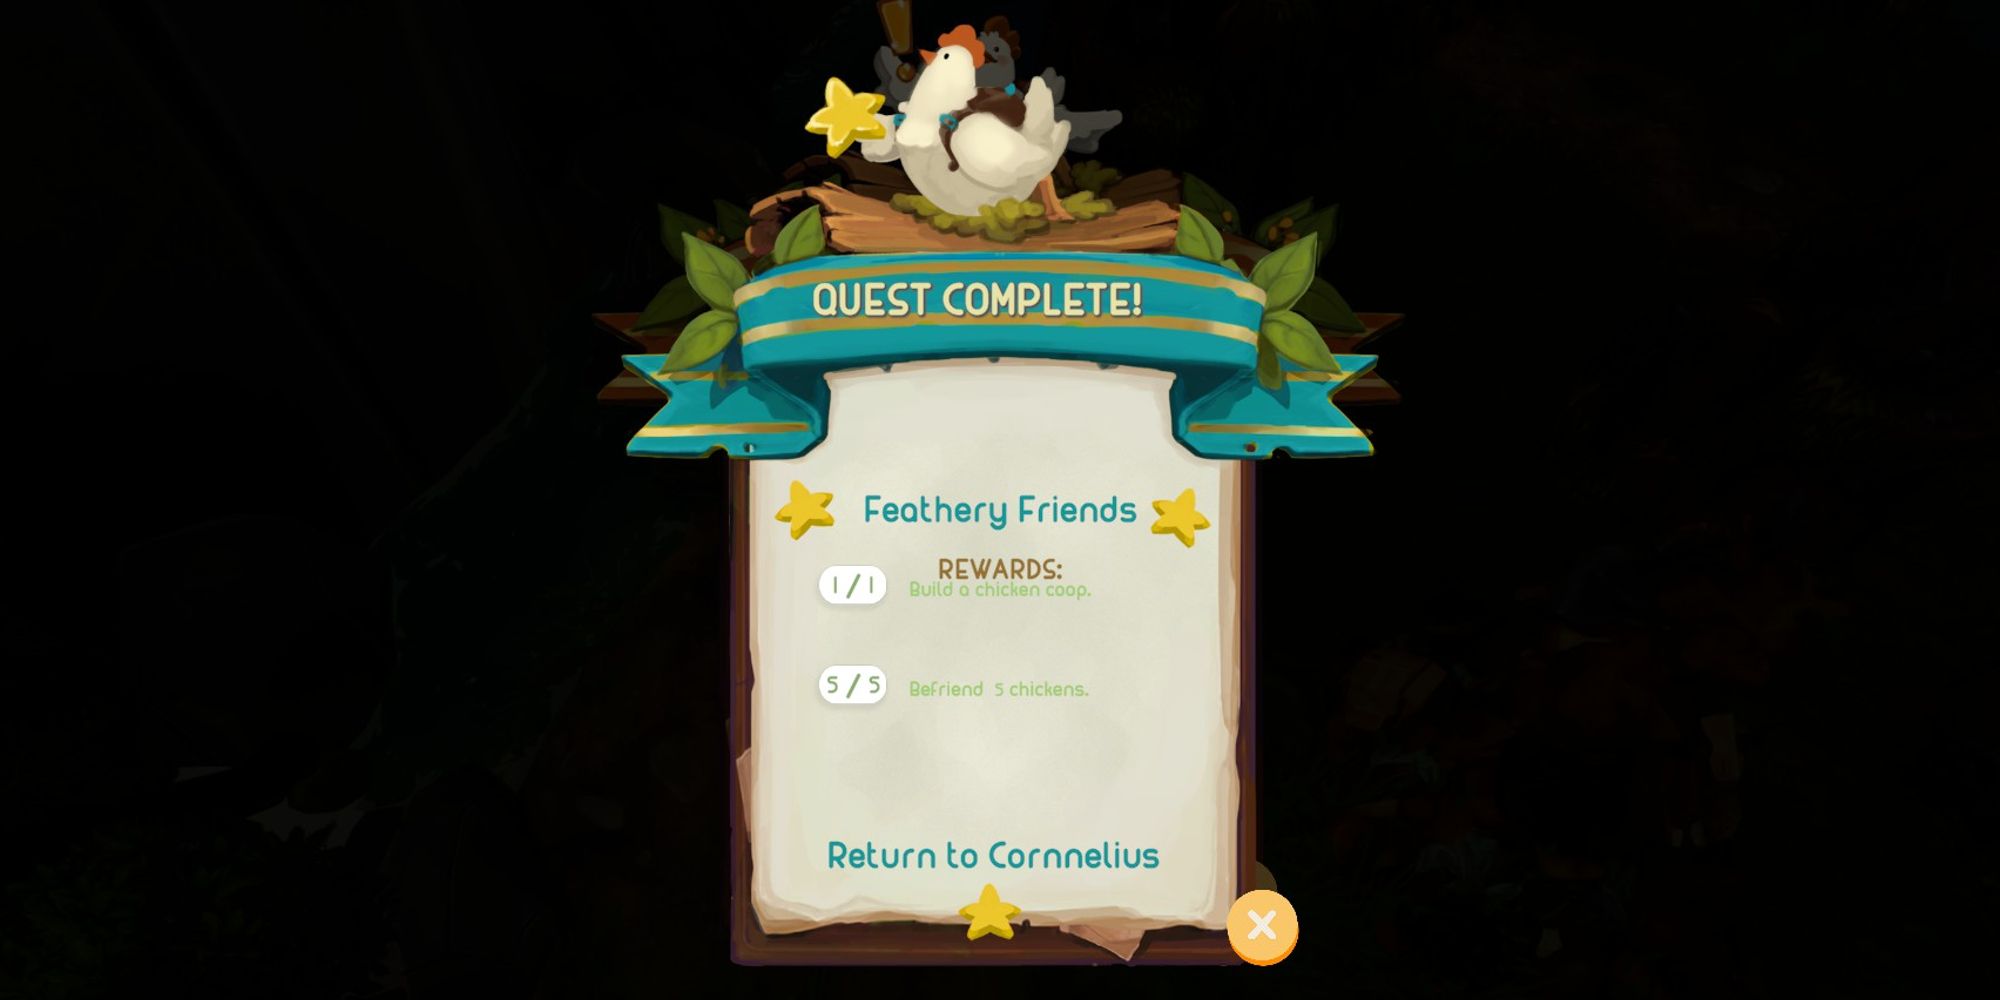 quest completion screen showing feathery friends quest